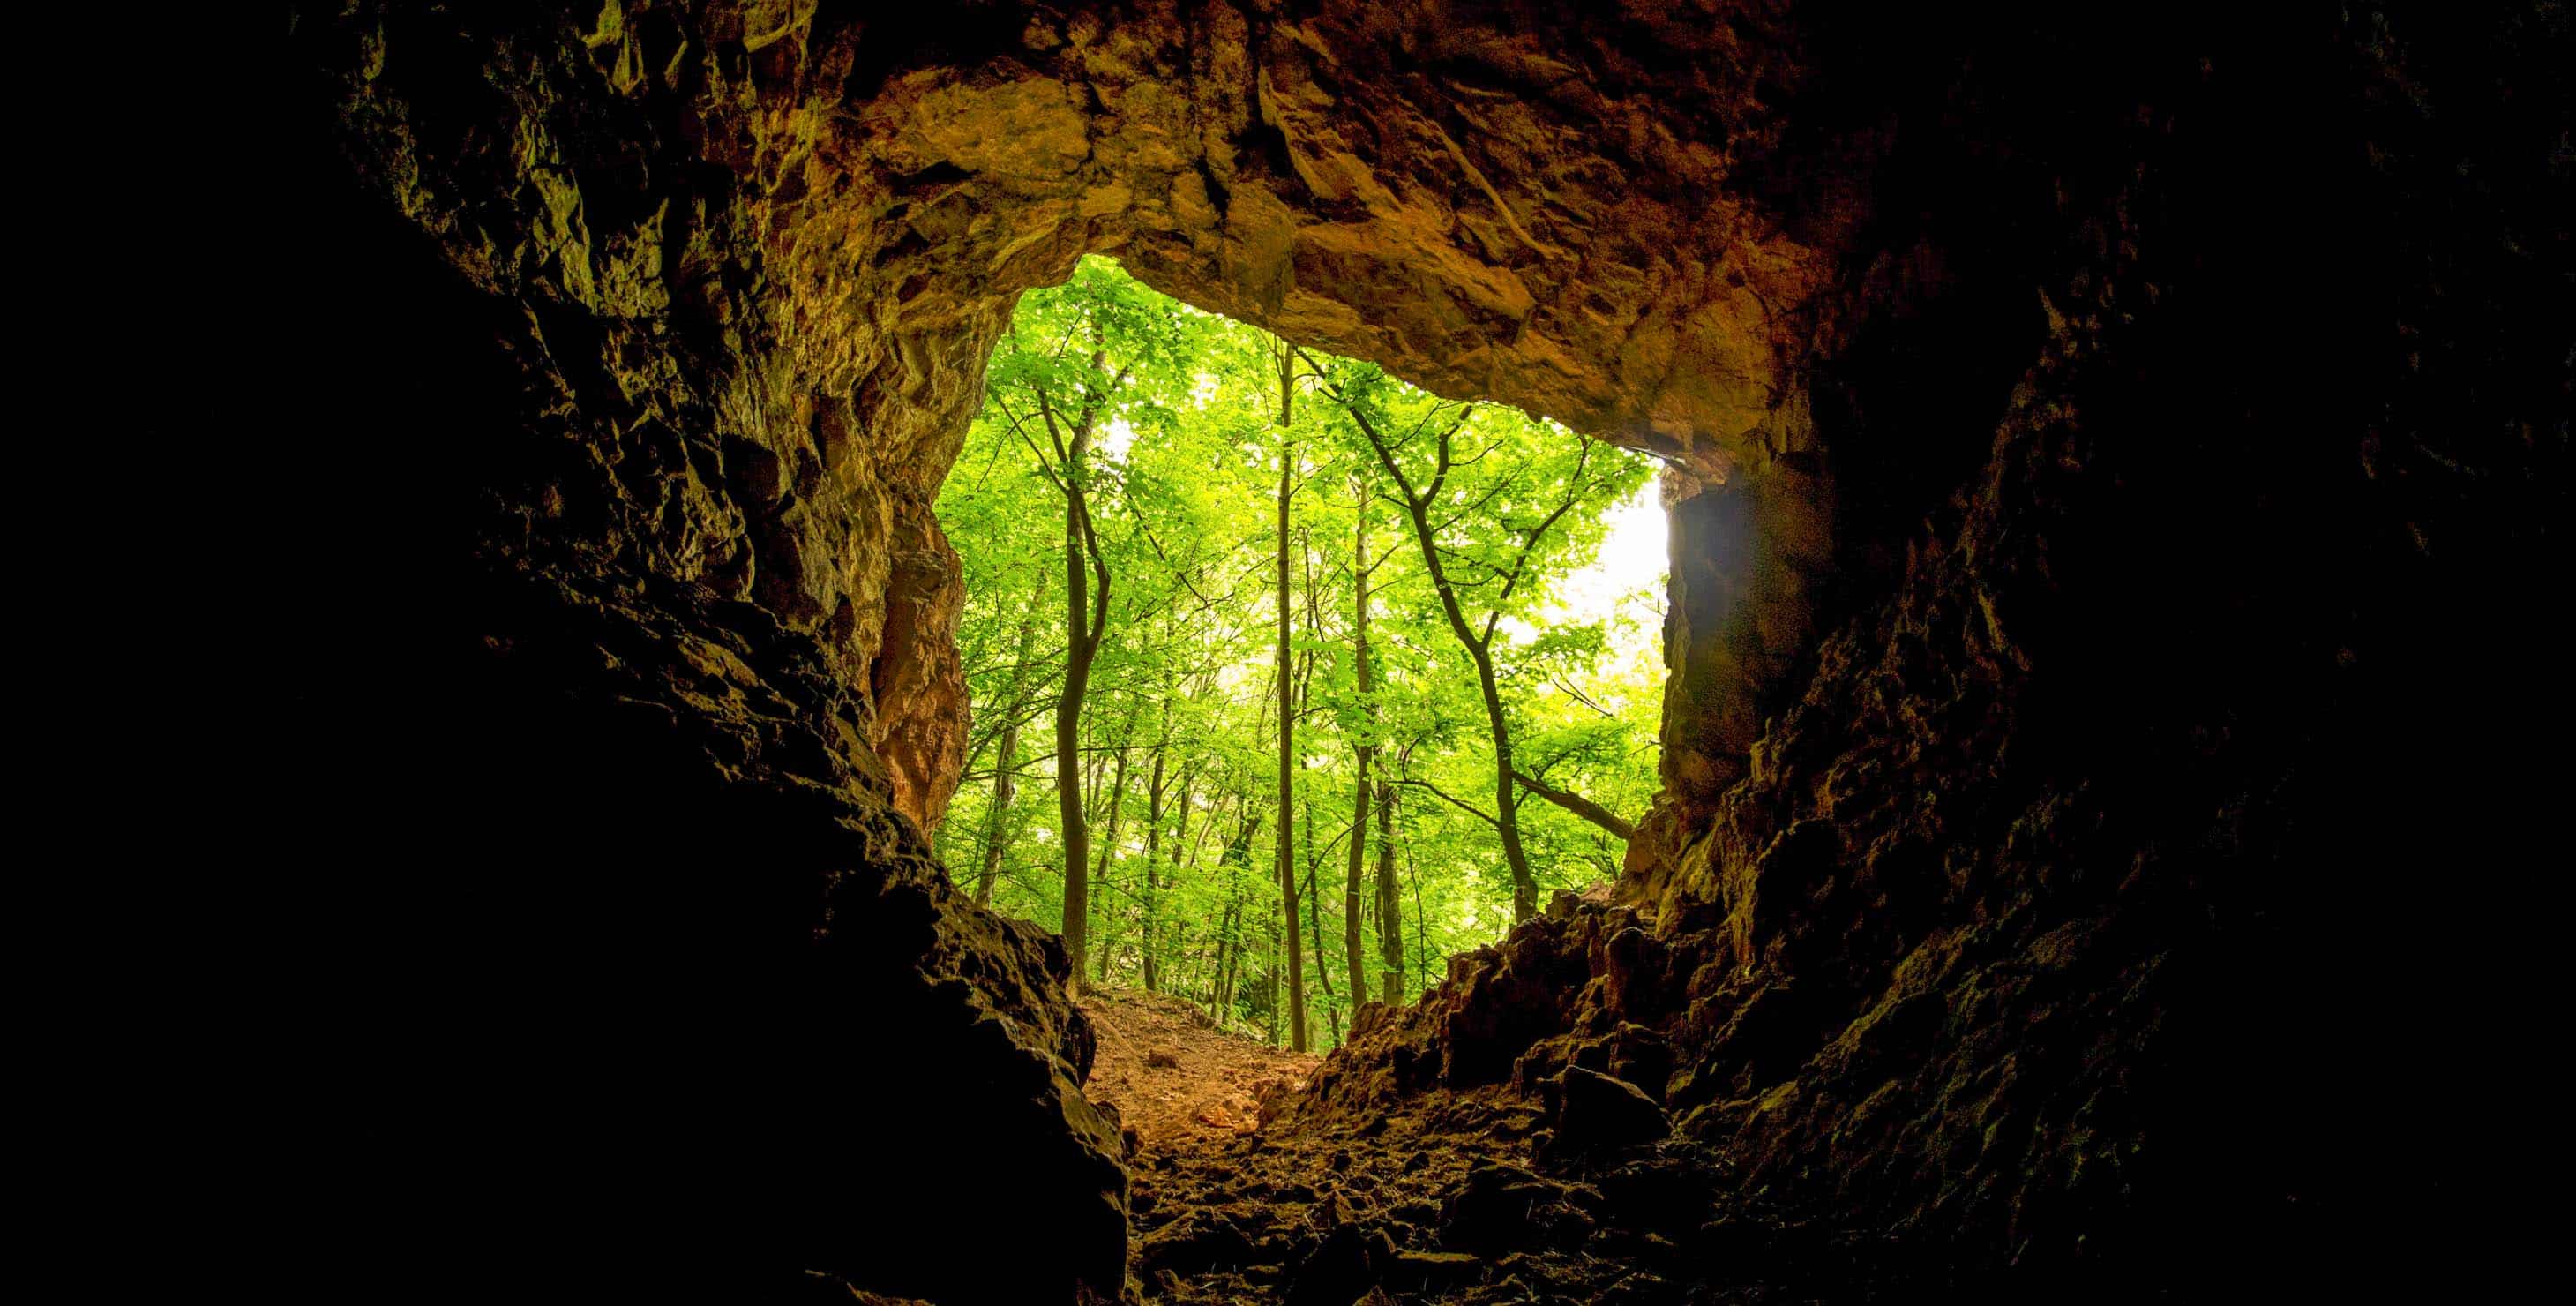 Cave exit with a bright forest